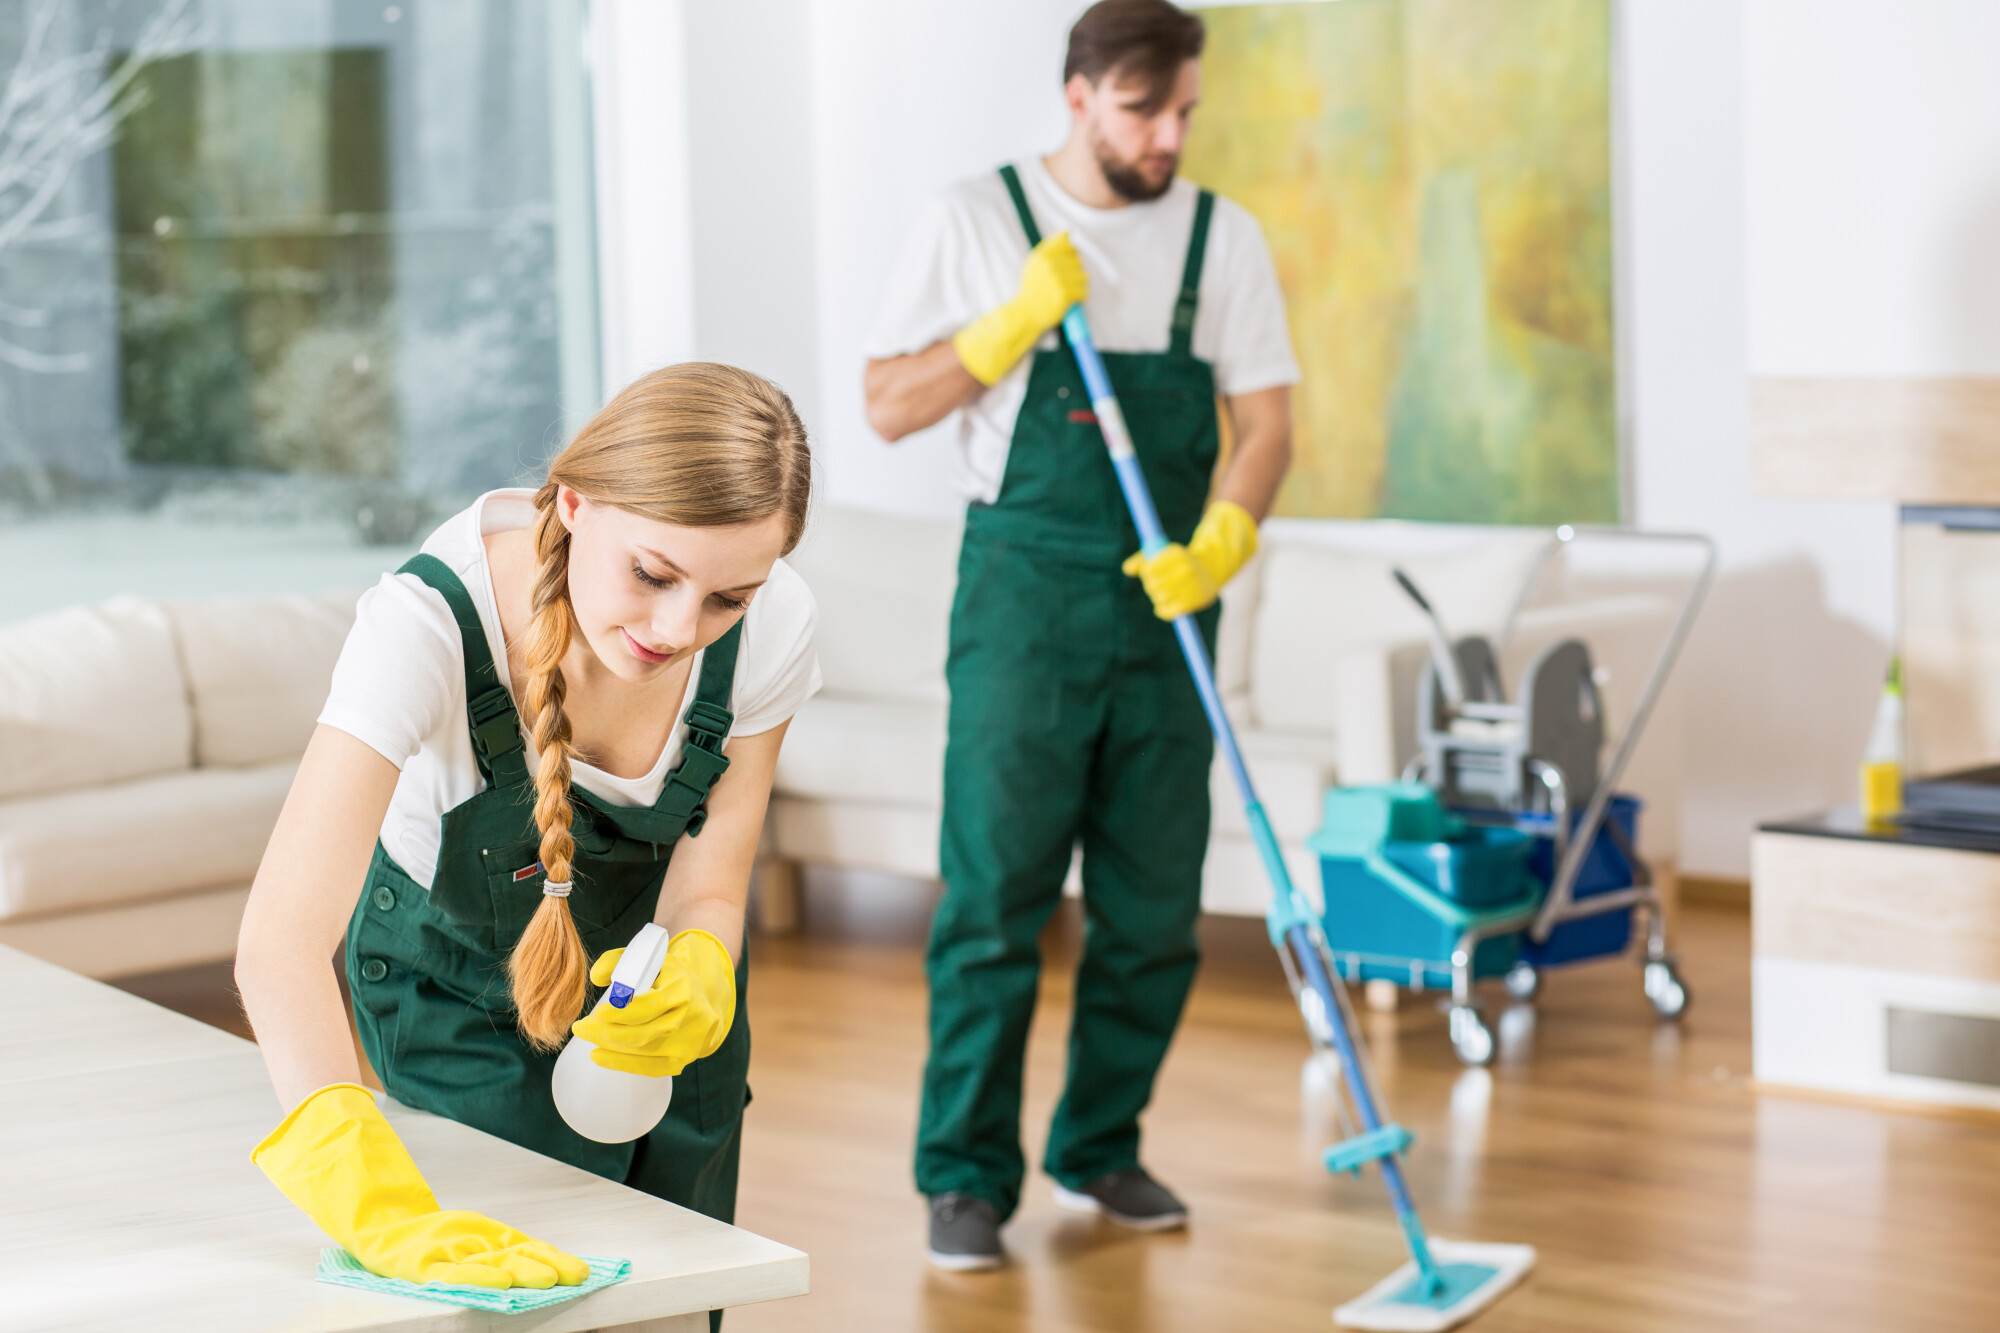 If you've got kids, keeping your home clean and tidy can be a real challenge. See our guide for realistic tips to keep your home clean with kids today.